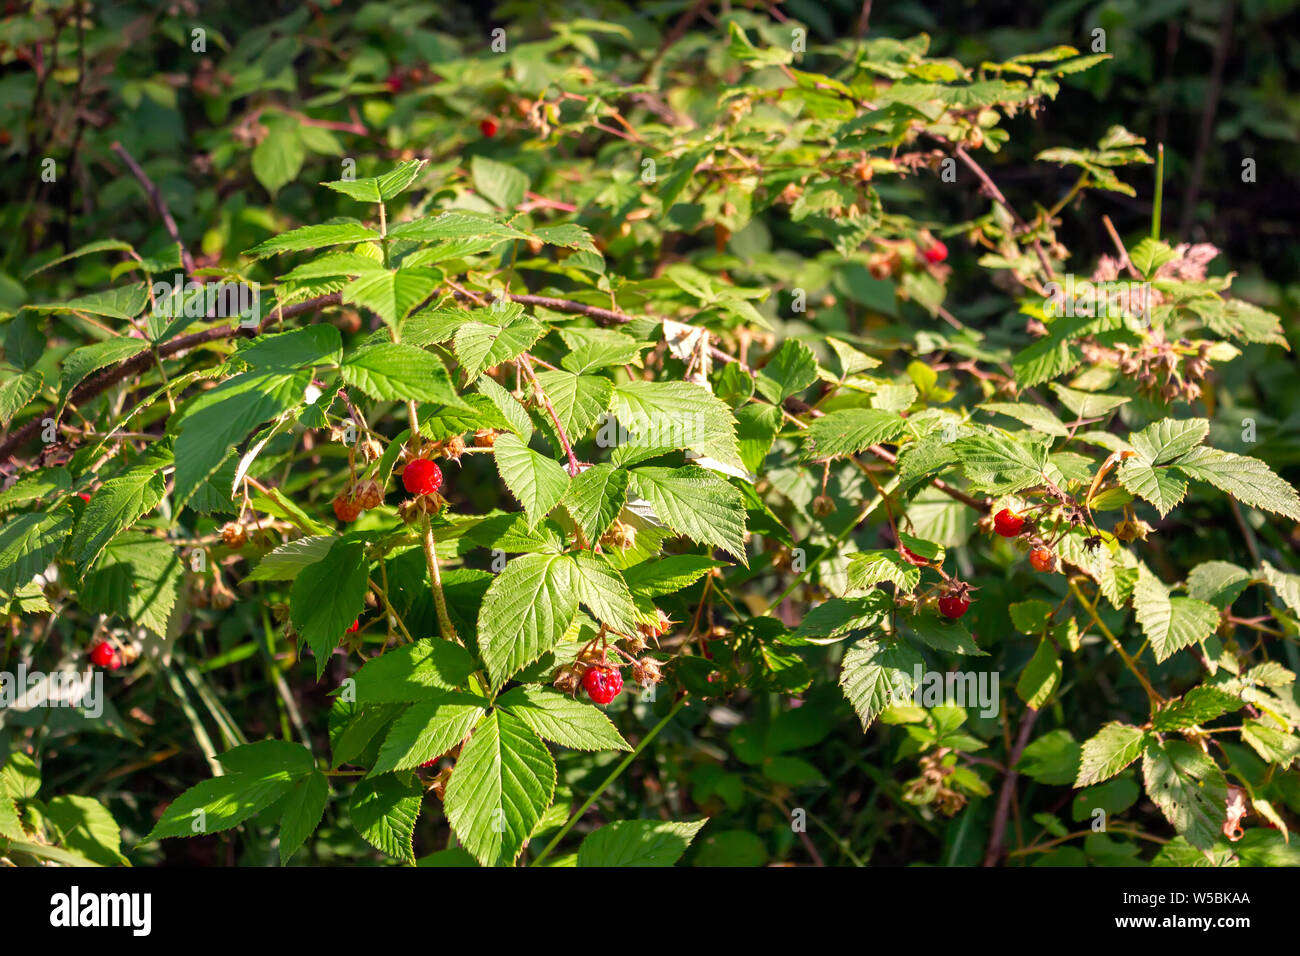 https://c8.alamy.com/comp/W5BKAA/red-raspberry-berries-hang-on-the-branches-raspberry-plantation-raspberry-bush-with-berries-close-up-W5BKAA.jpg